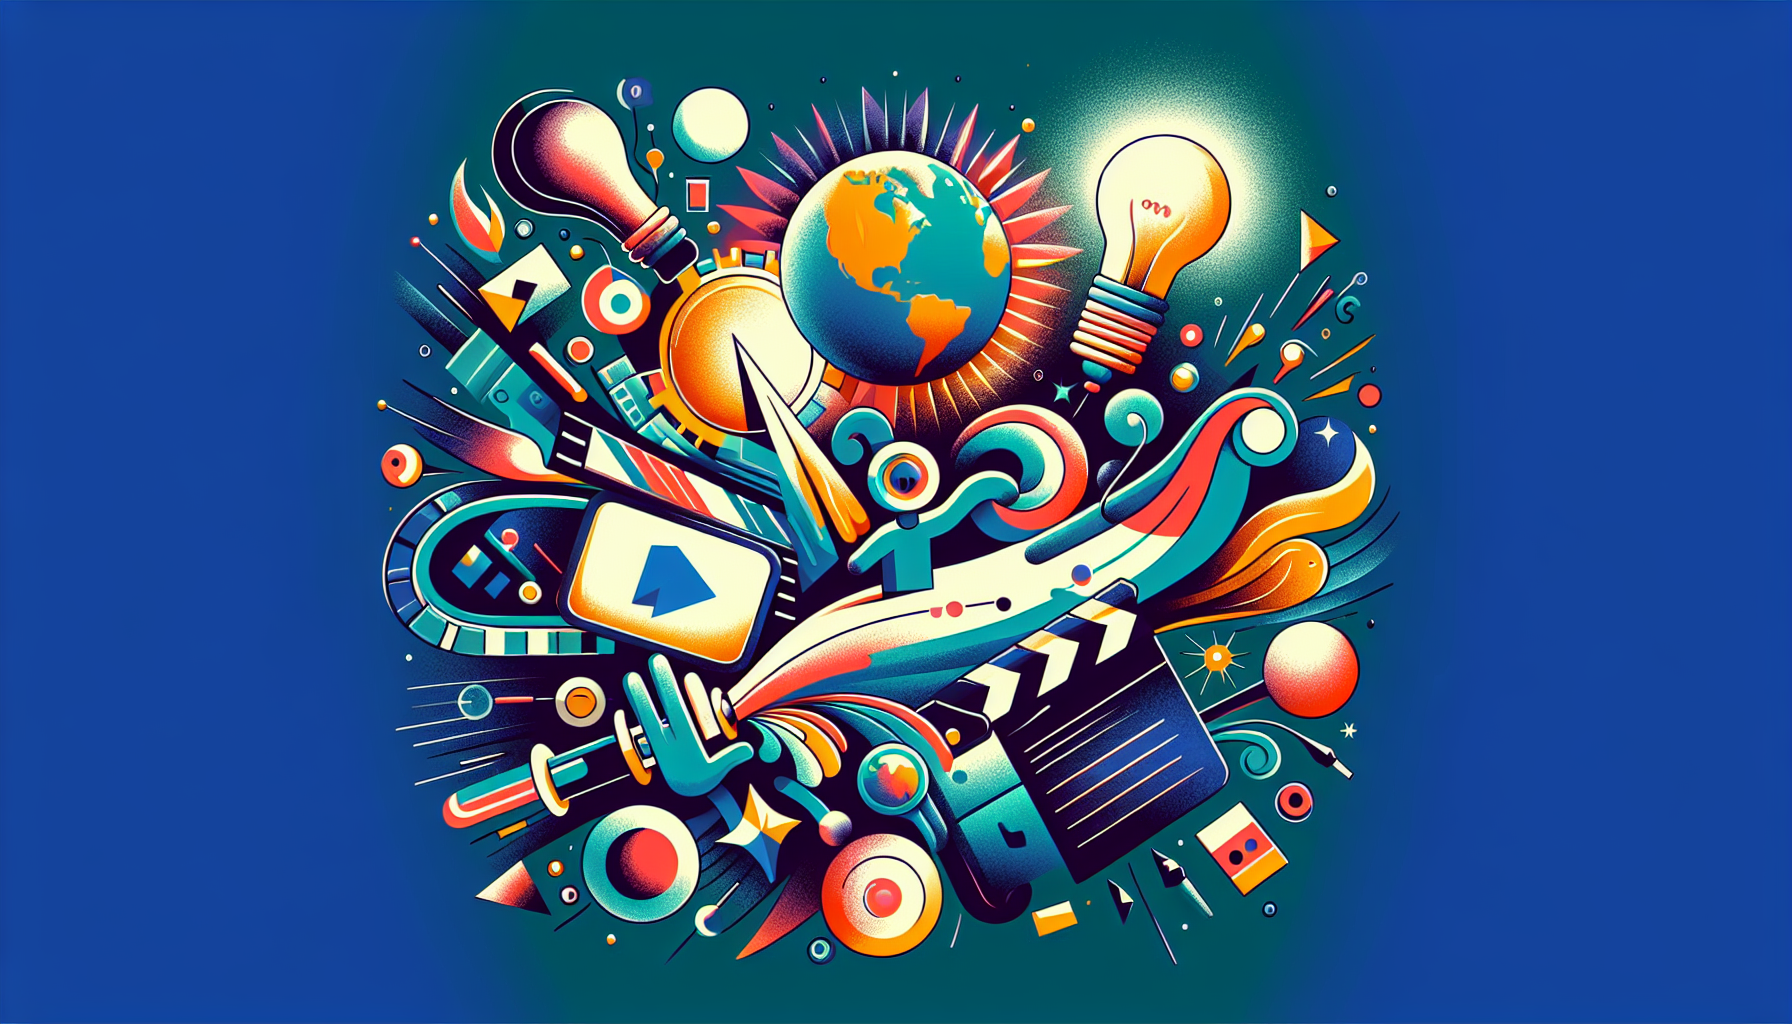 Illustrate an abstract concept of social commentary in the medium of animated films. The illustration should be wordless, emphasizing only the clever use of visuals. Incorporate elements suggesting both the light-heartedness and the serious undertones typically associated with this genre. The style should be contemporary and filled with brilliant colors.